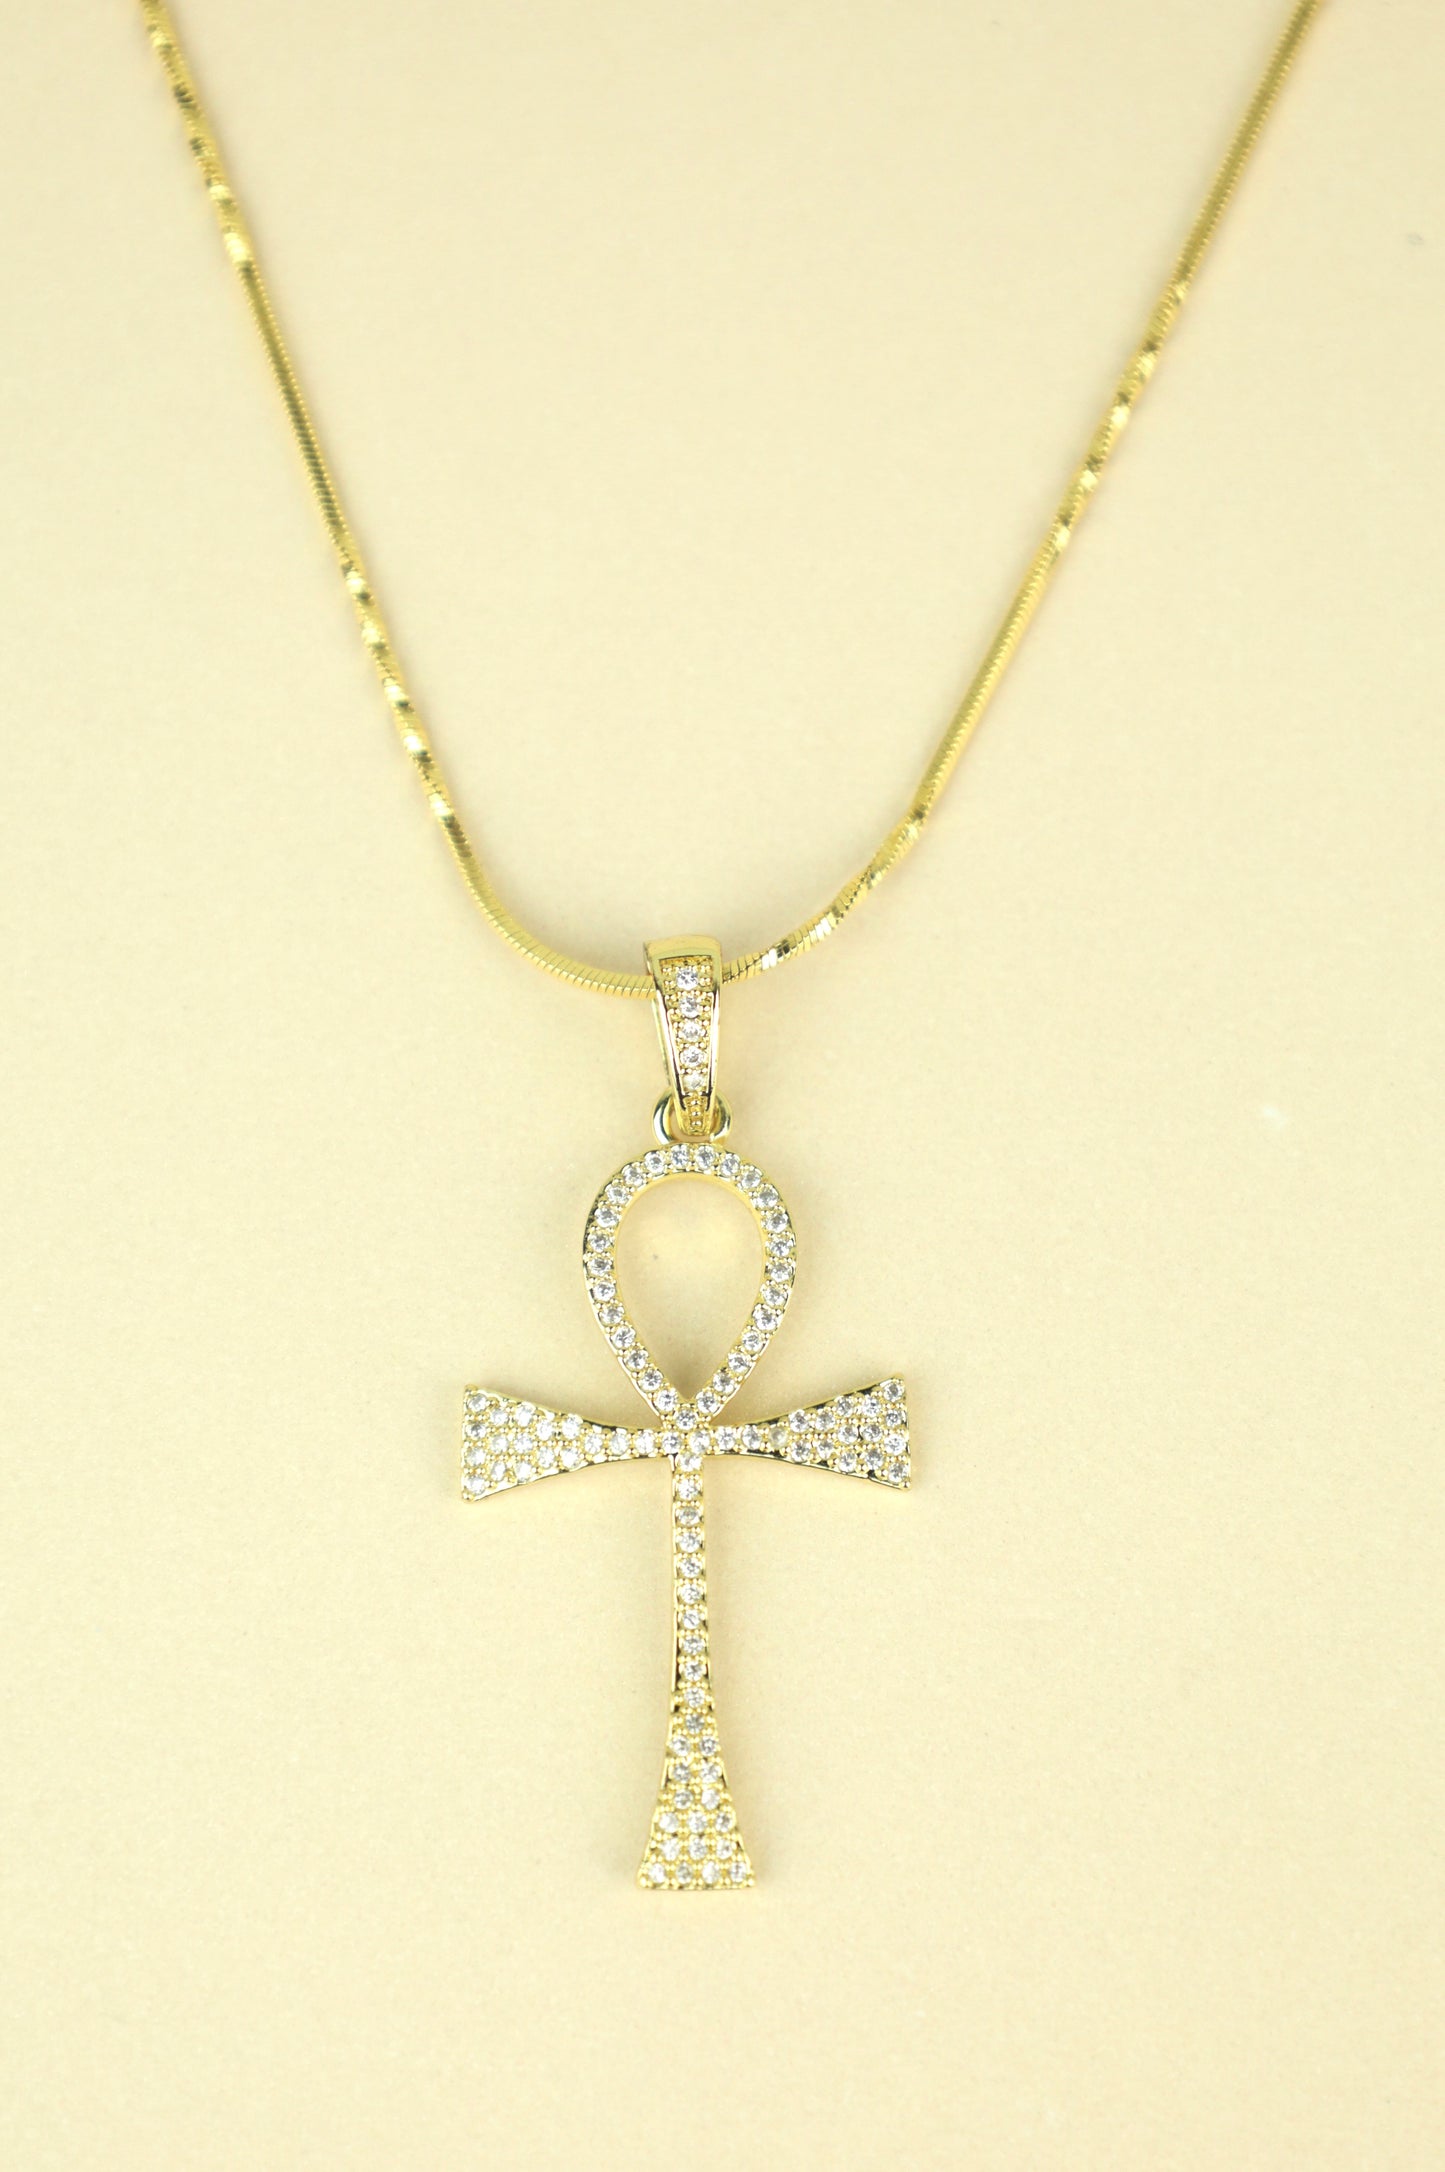 Tie Ankh necklace in gold